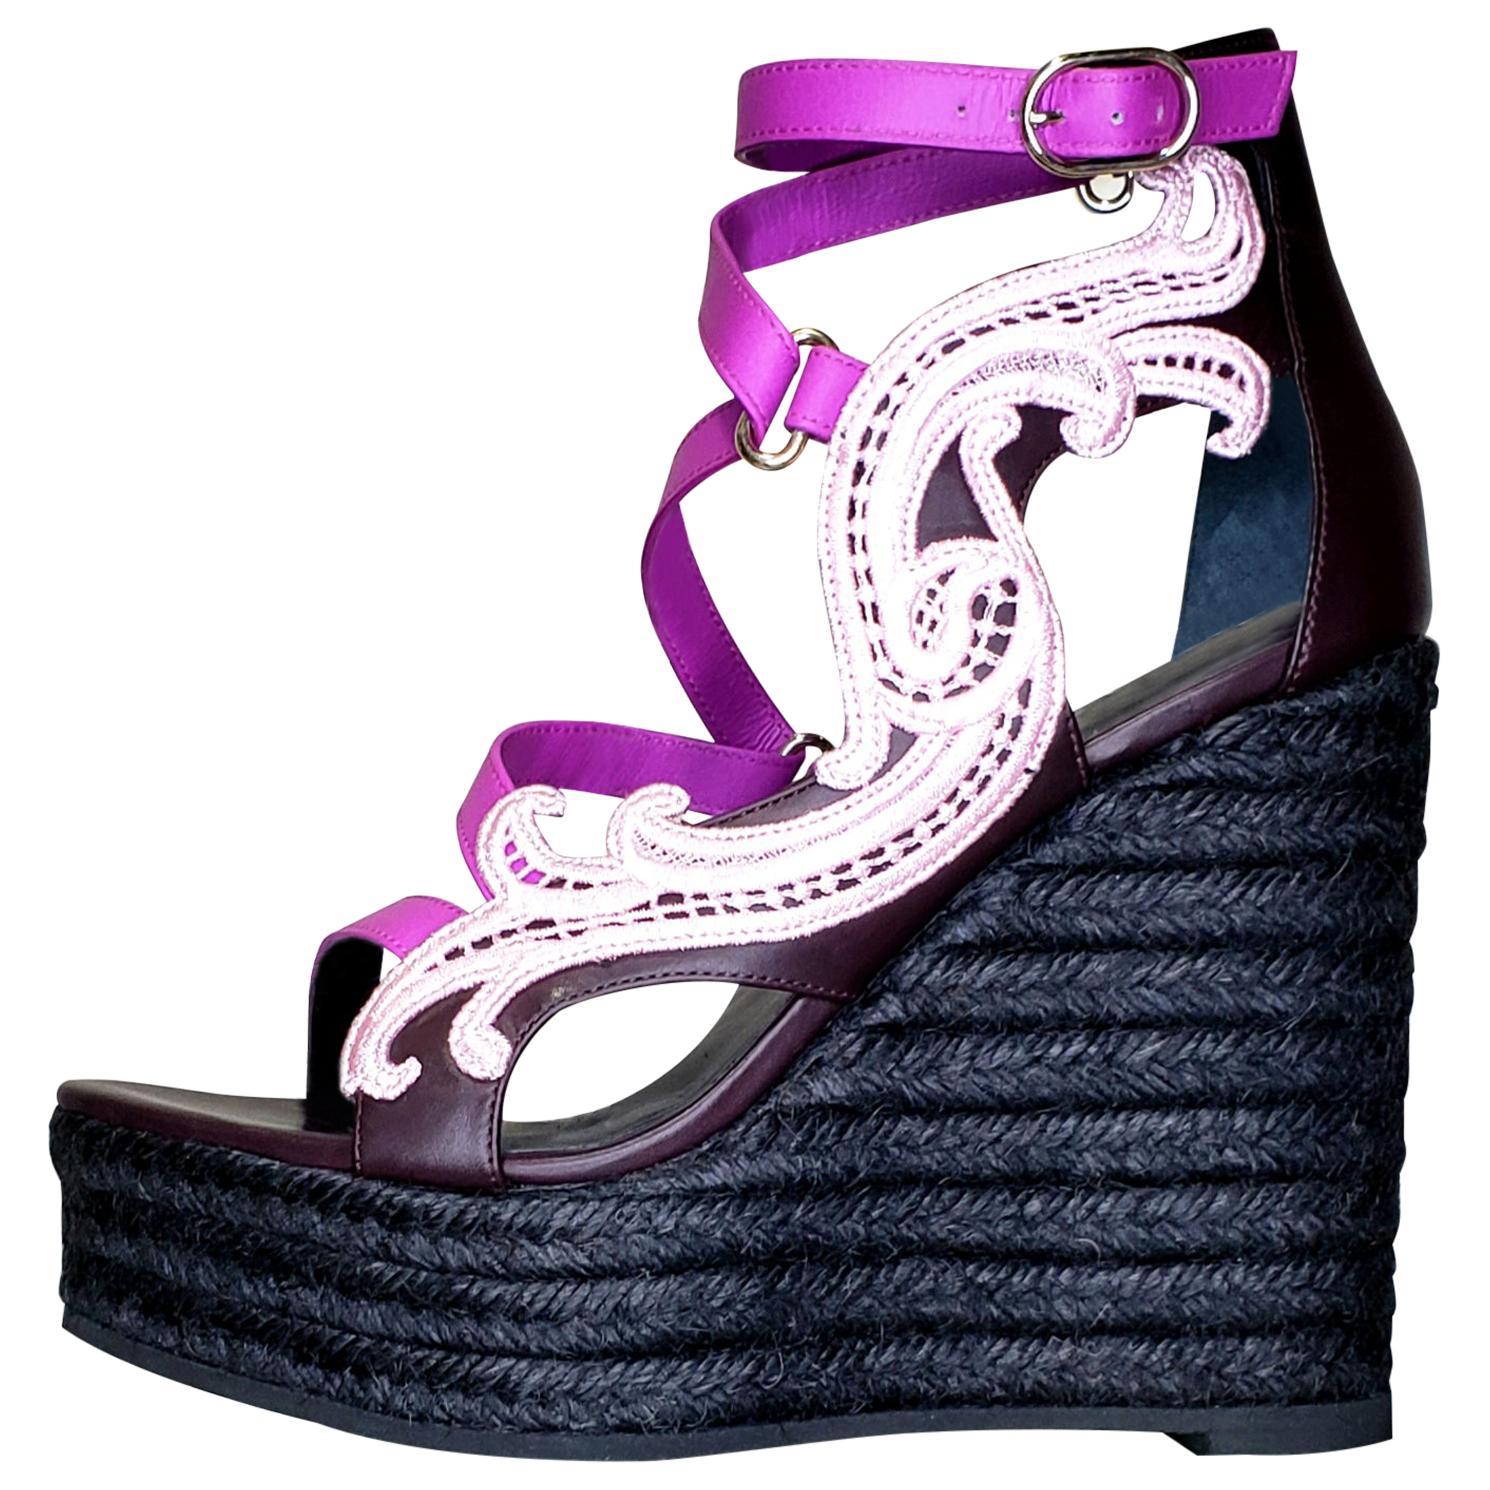 NEW VERSACE PURPLE LEATHER and PINK LACE WEDGE SANDALS 37, 37.5, 38.5